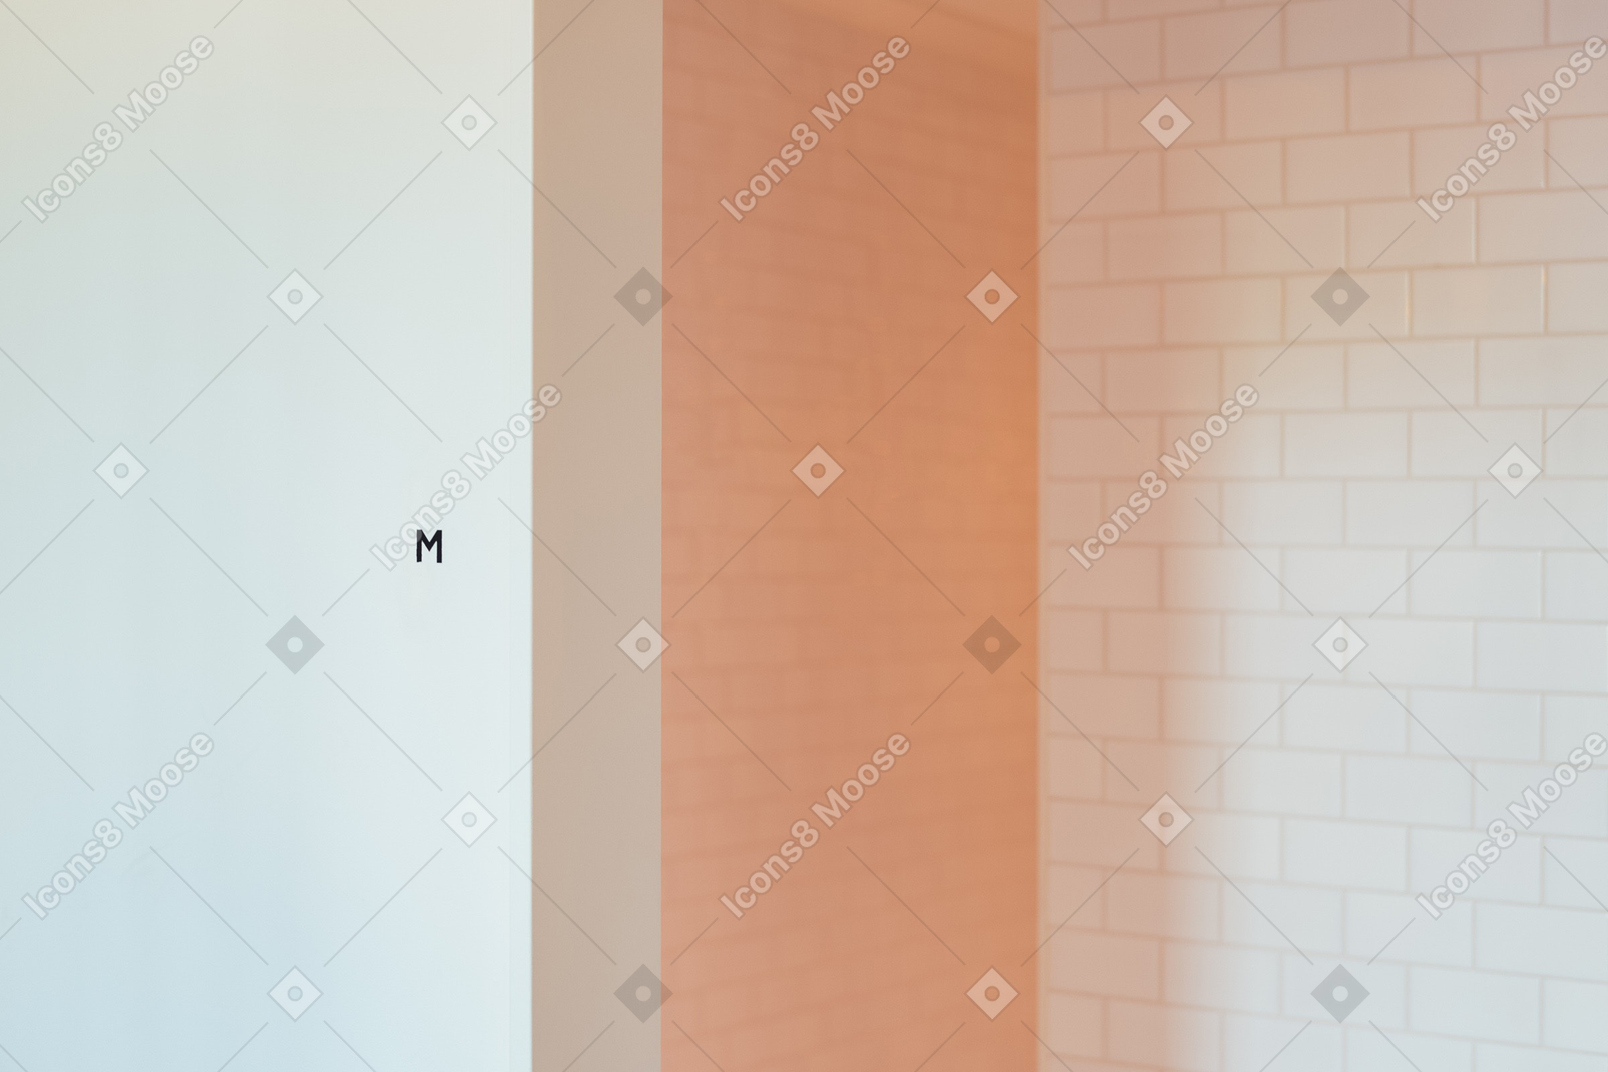 Tile and white wall background